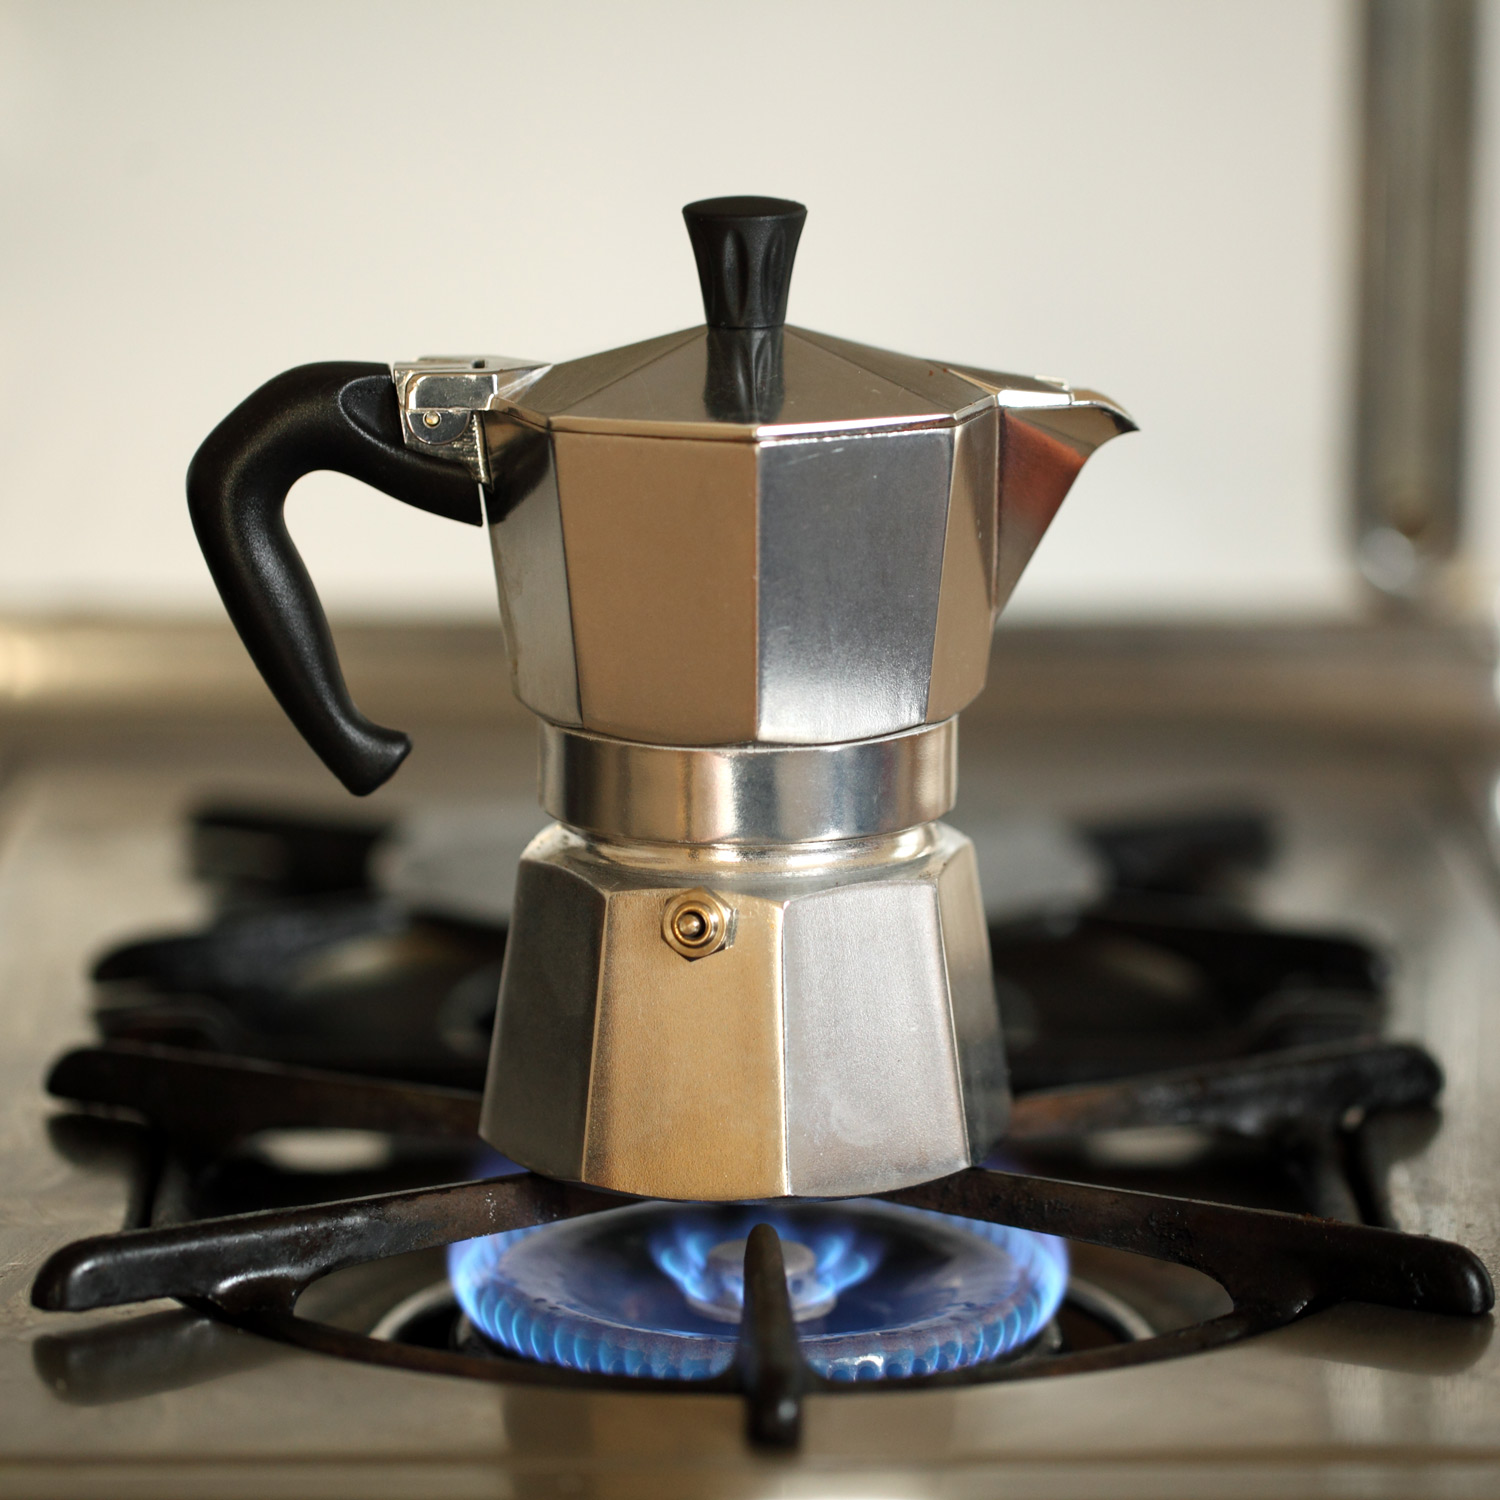 A Step-By-Step Guide to Making a Stovetop Espresso